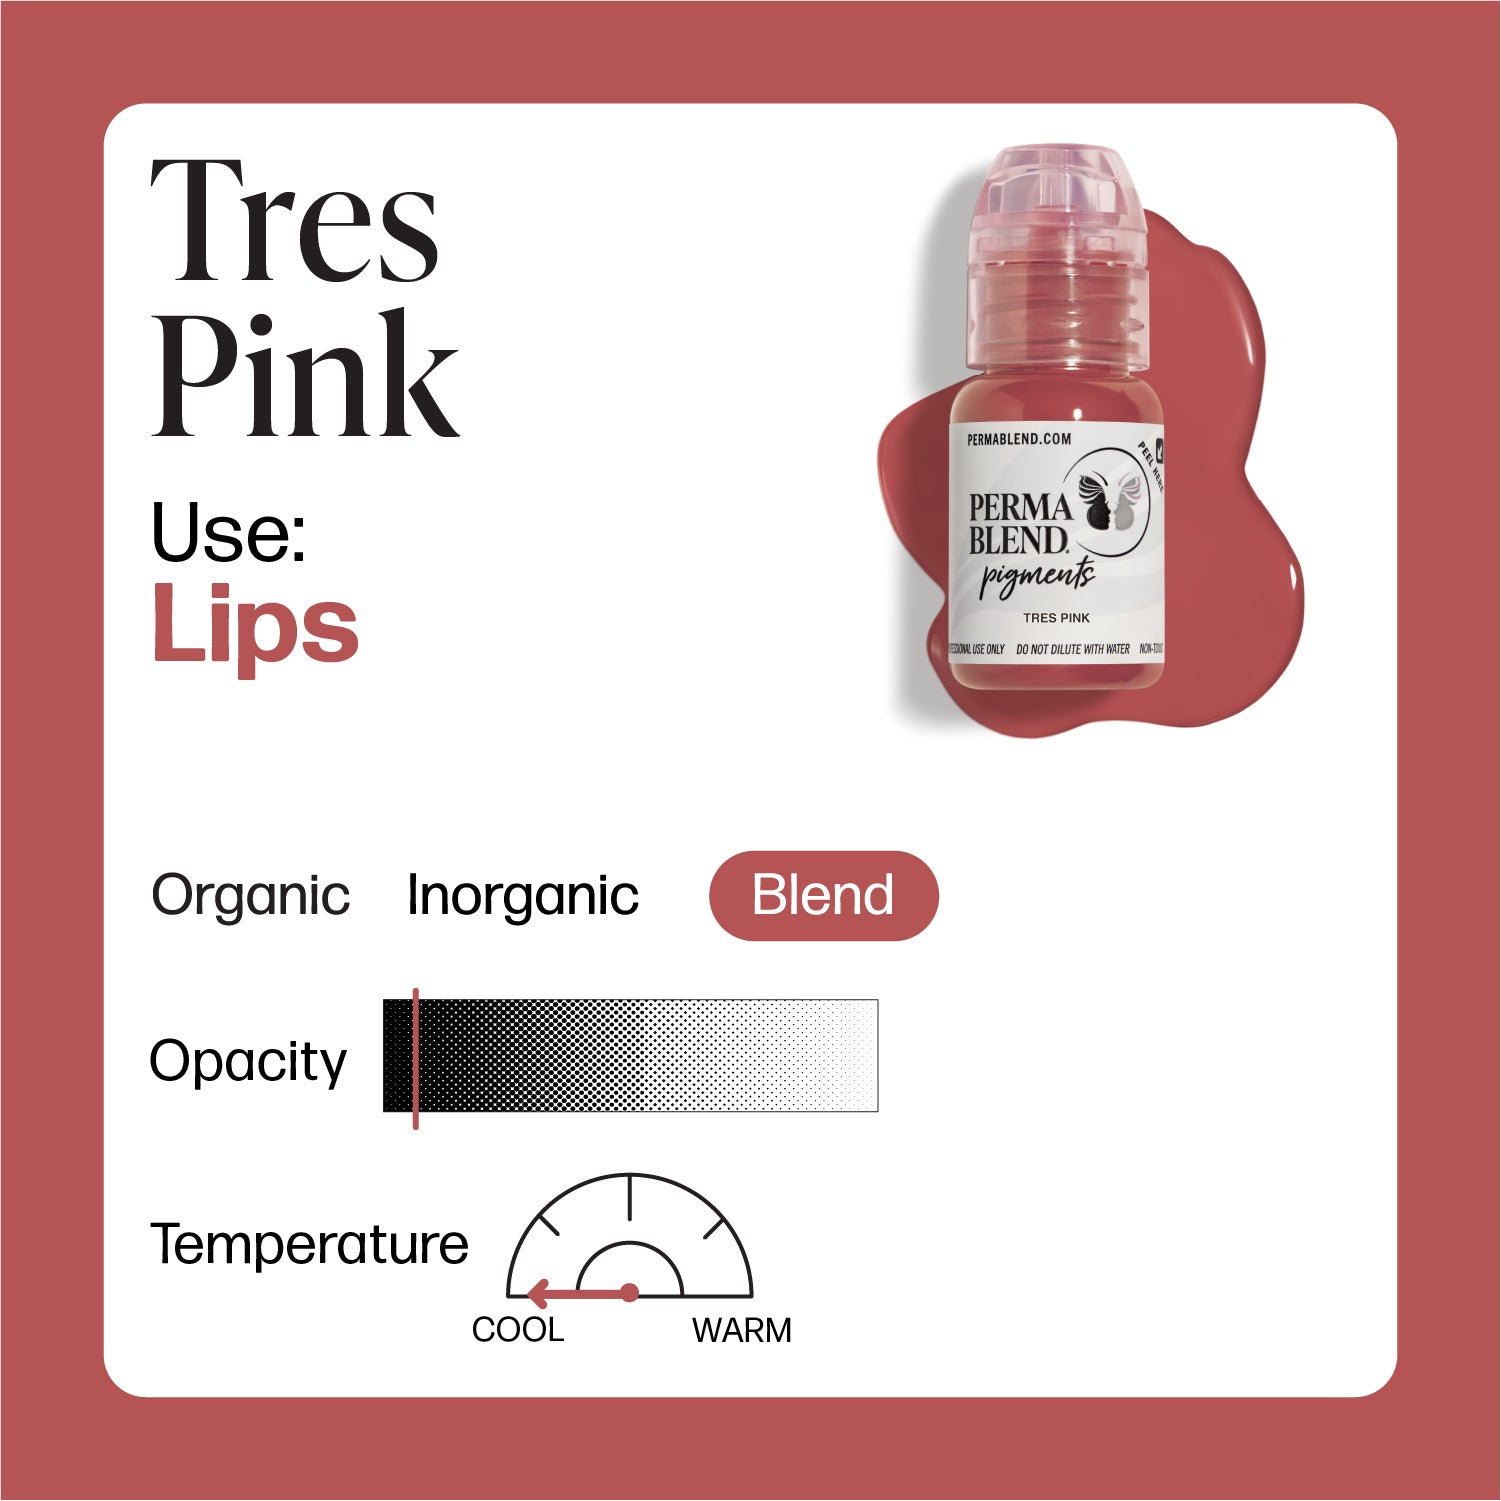 Perma Blend - Tres Pink - Ultimate Tattoo Supply